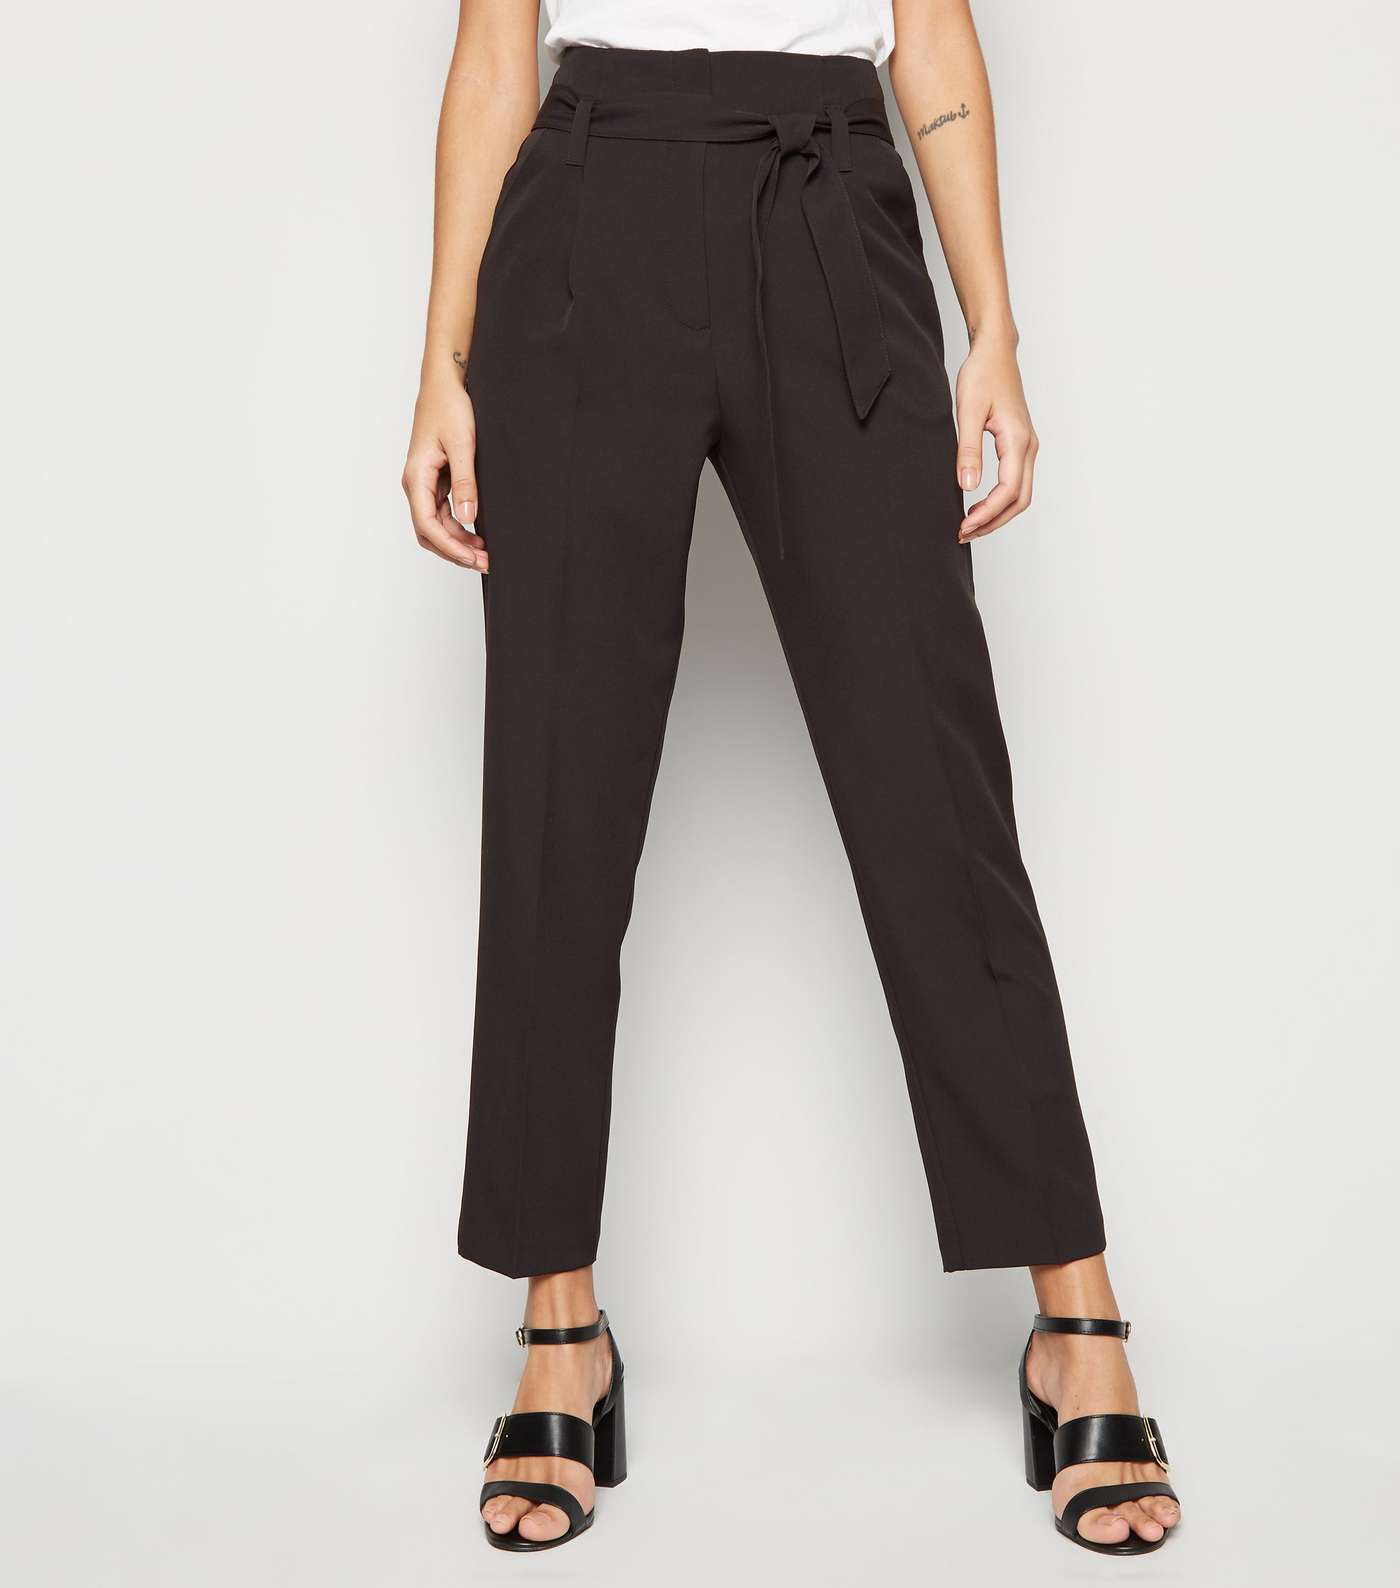 Black Belted High Waist Trousers Image 2